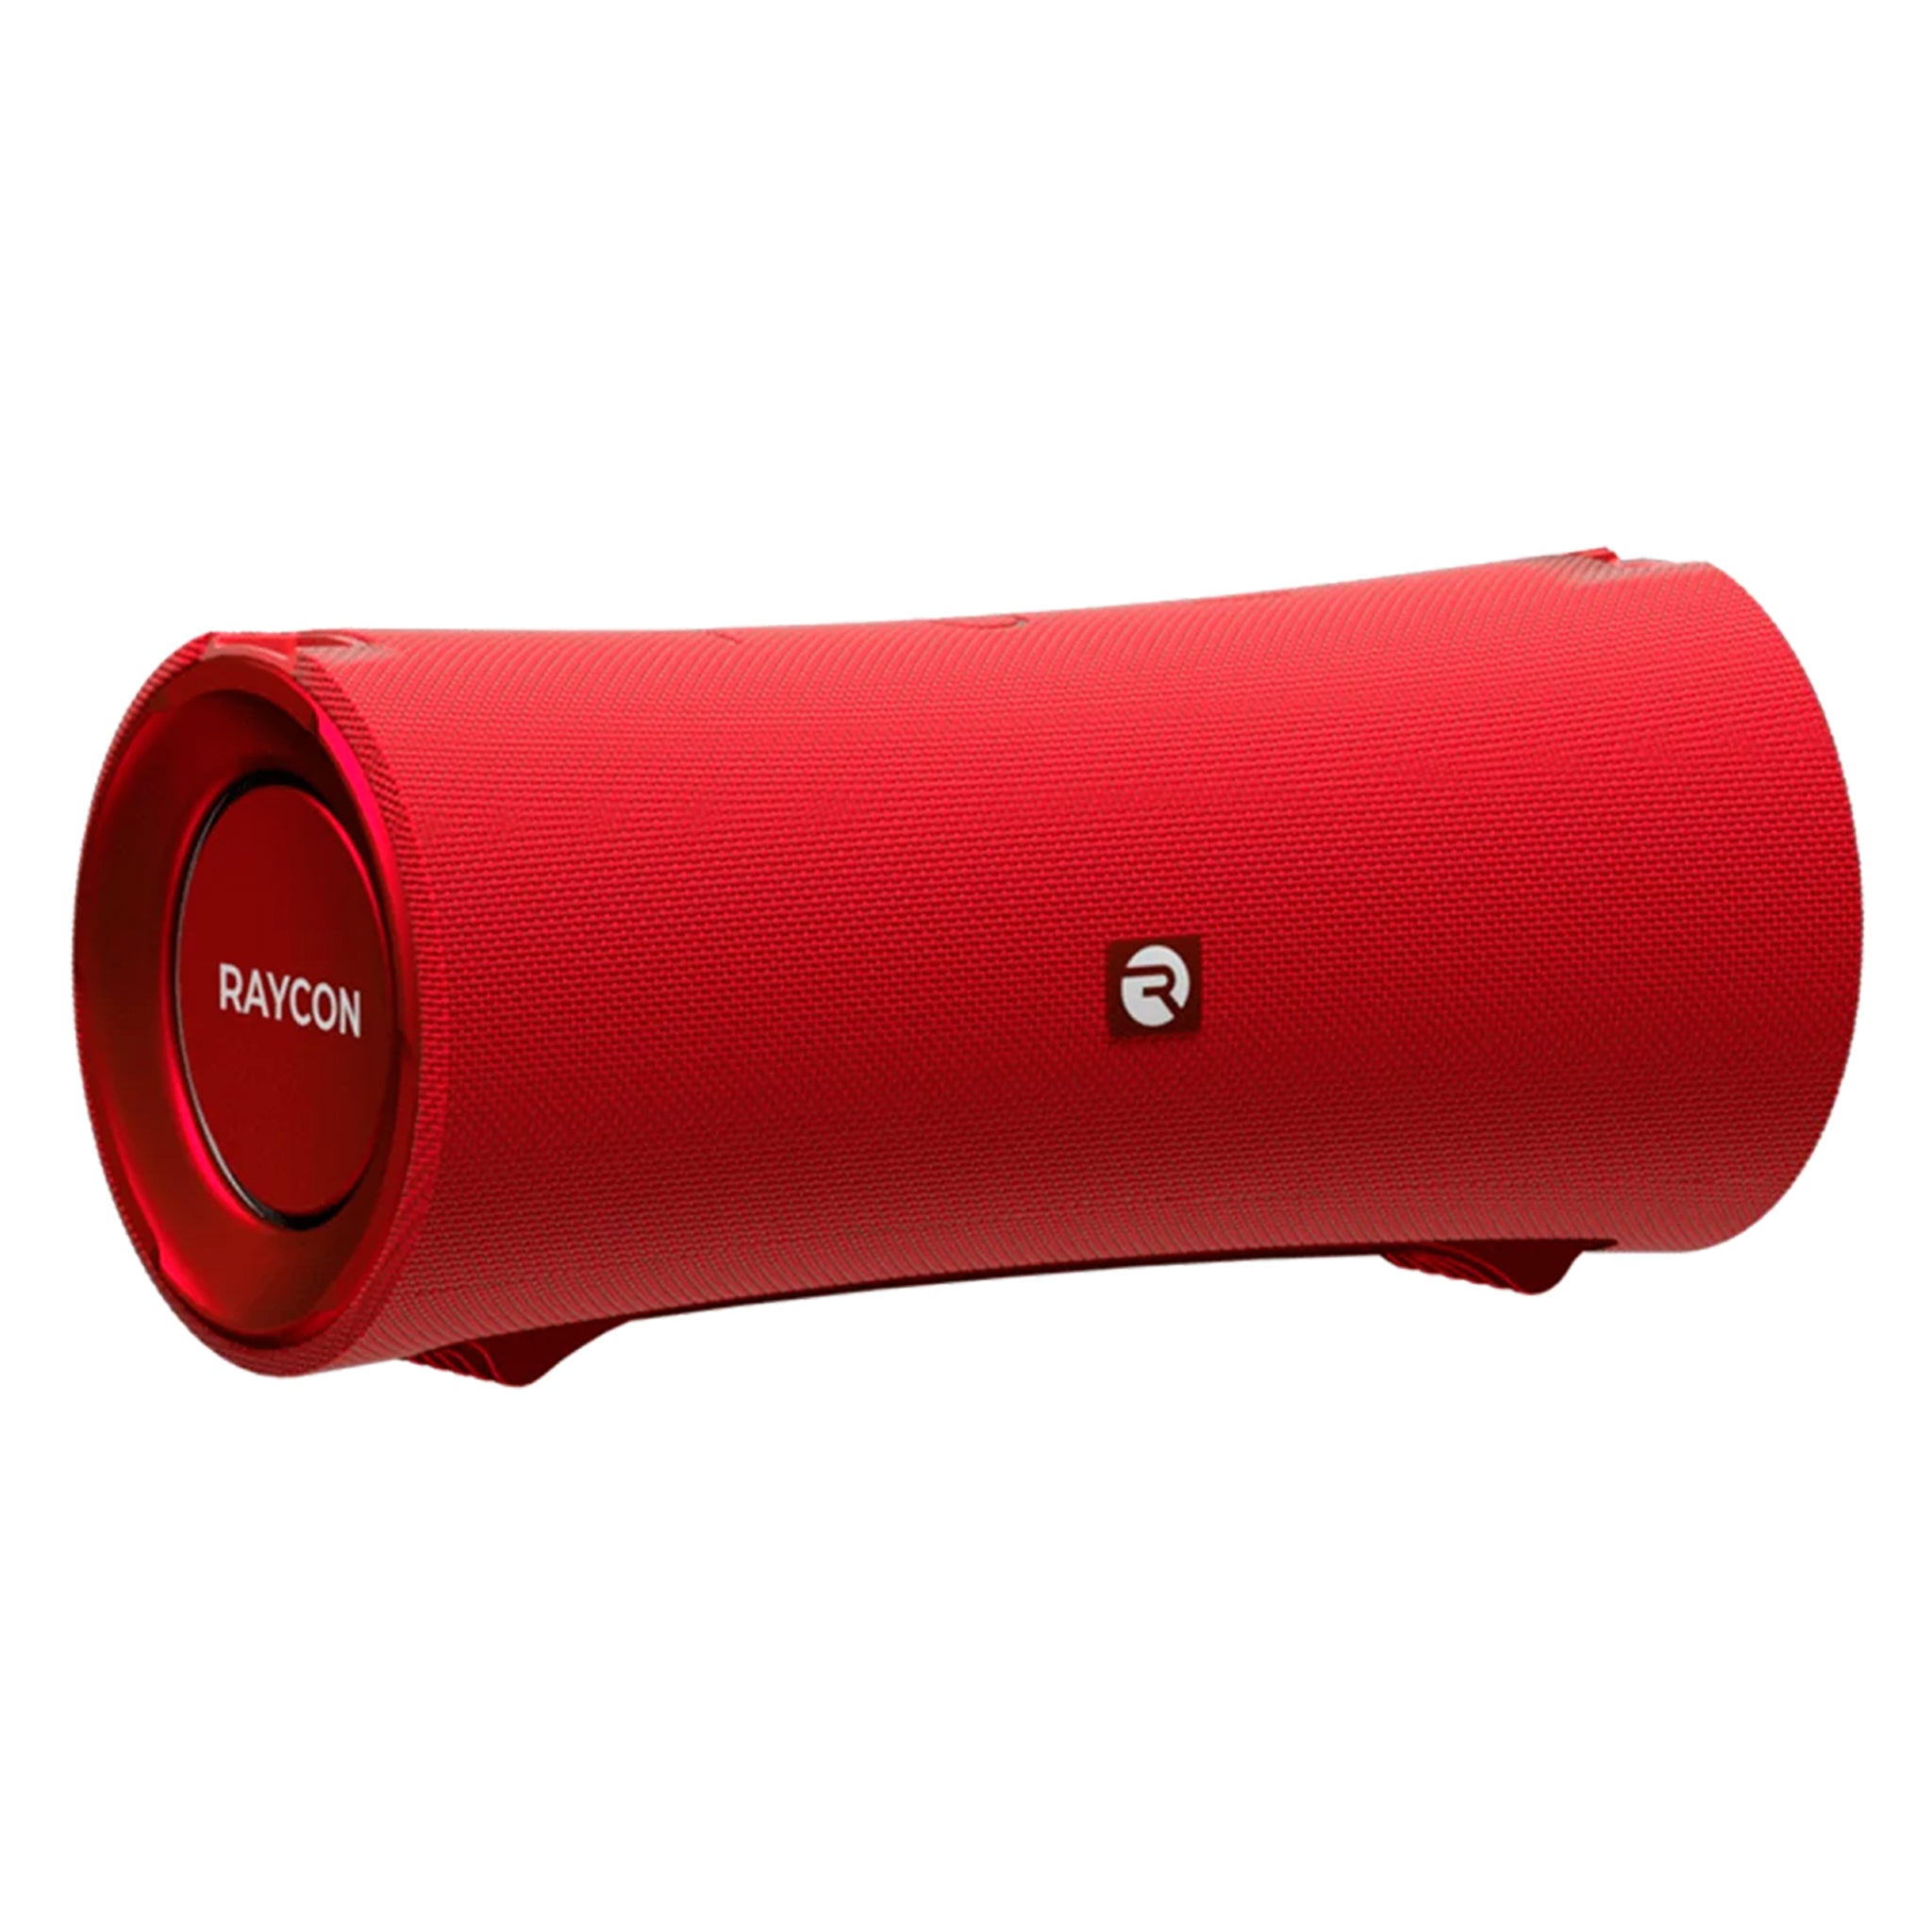 Raycon - The Fitness Bluetooth Speaker - Red